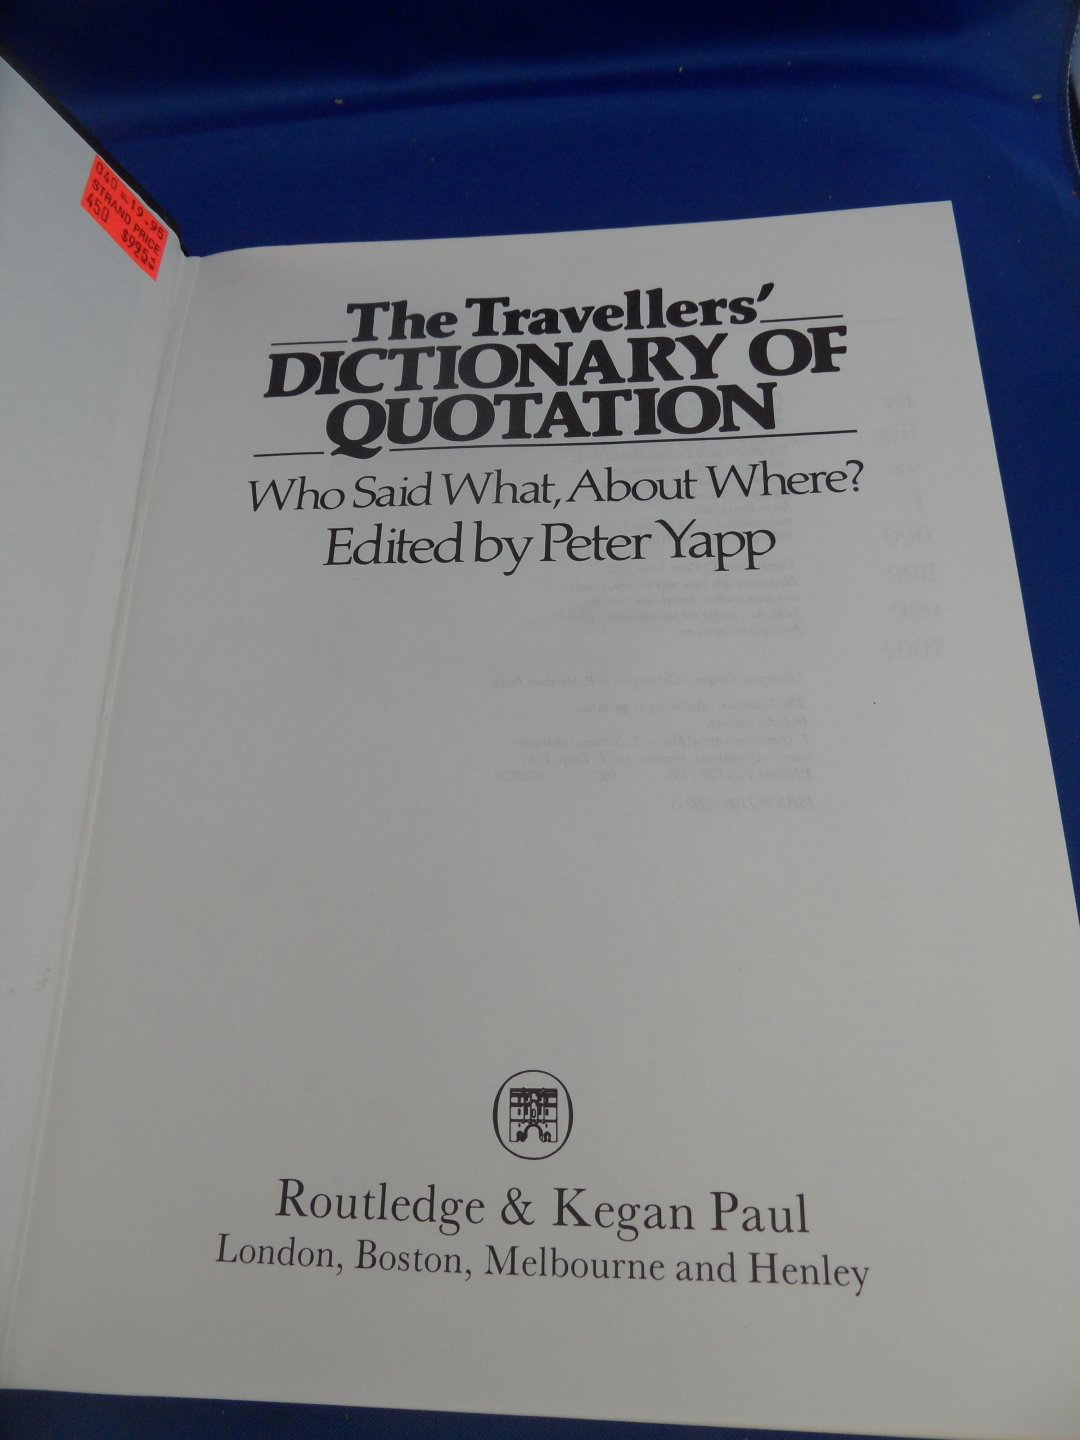 Yapp, Peter - The travellers' dictionary of quotation. Who said what, about where?